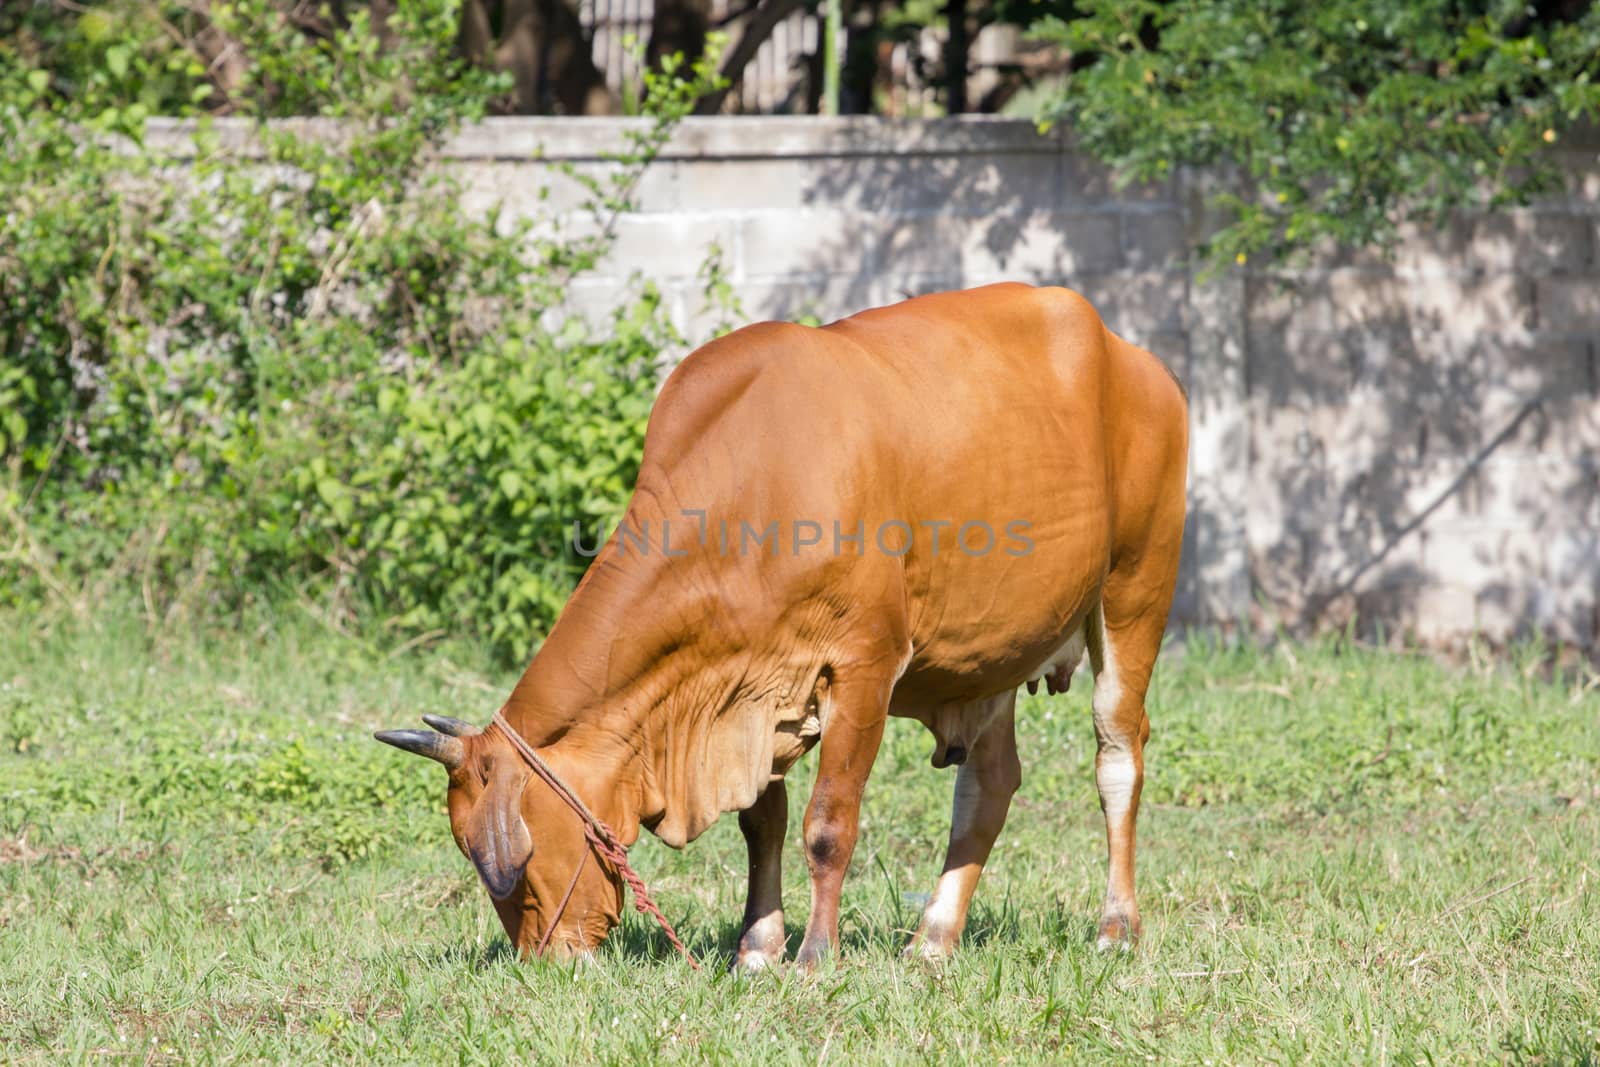 brown cow eating grass in a field in Thailand